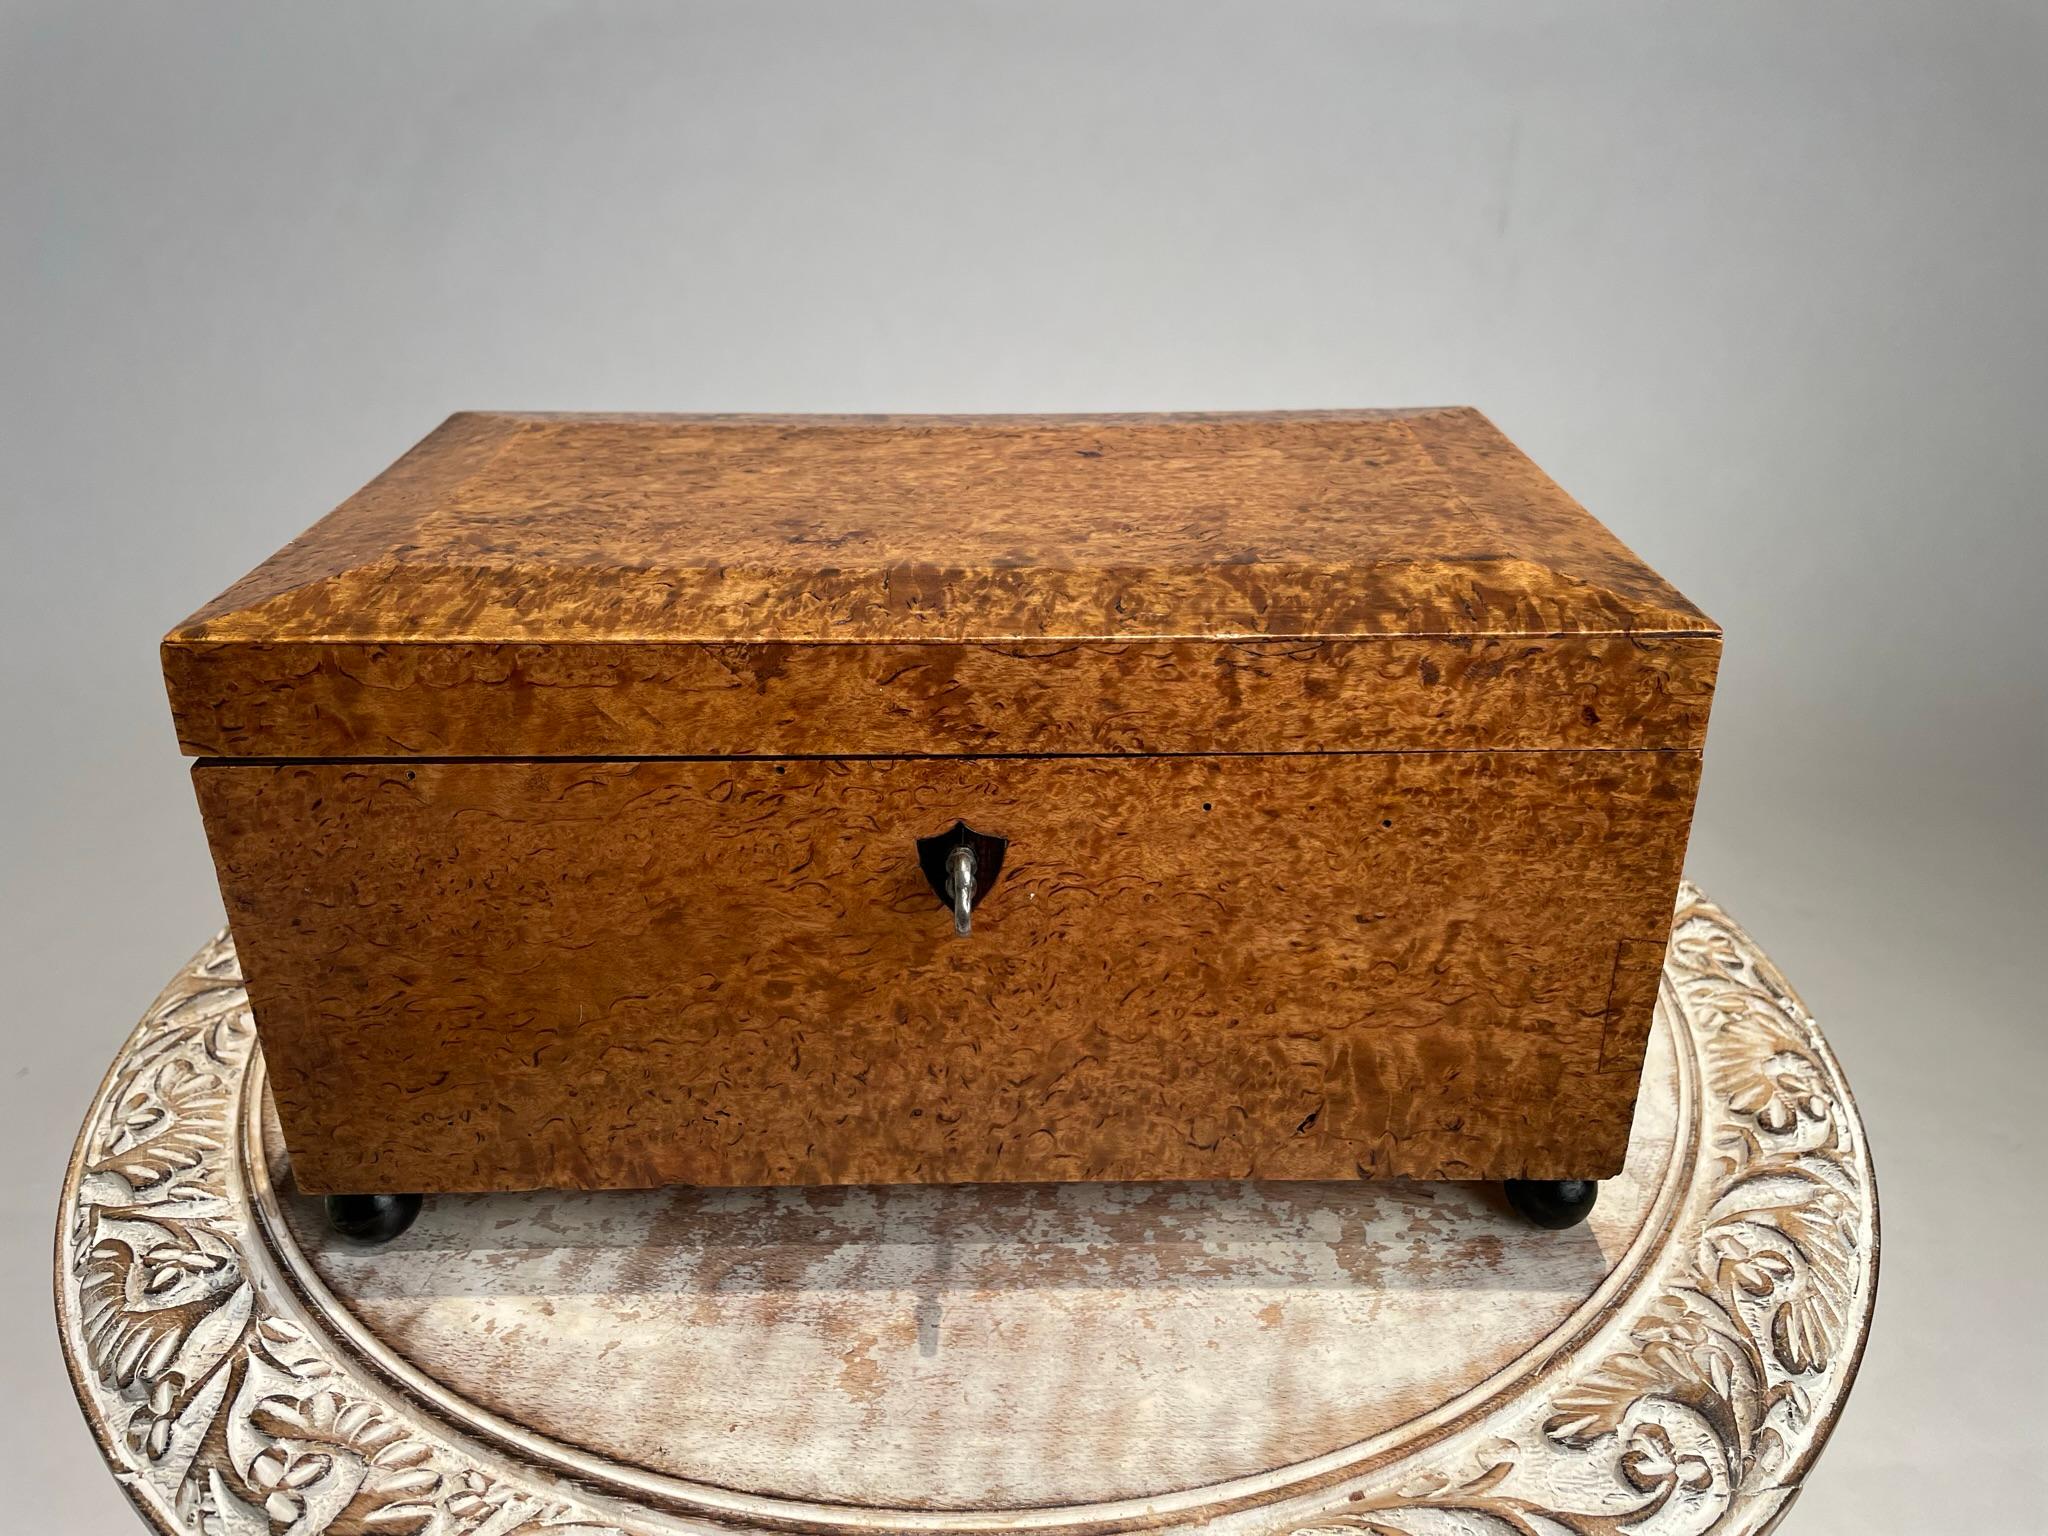 A handsome and beautifully made English Regency burl wood veneered box. The thick burl veneer covering the four sides and top, resting on four ebonized ball feet . A rich honey patina that only comes with age and handling. Inset ebony escutcheon,